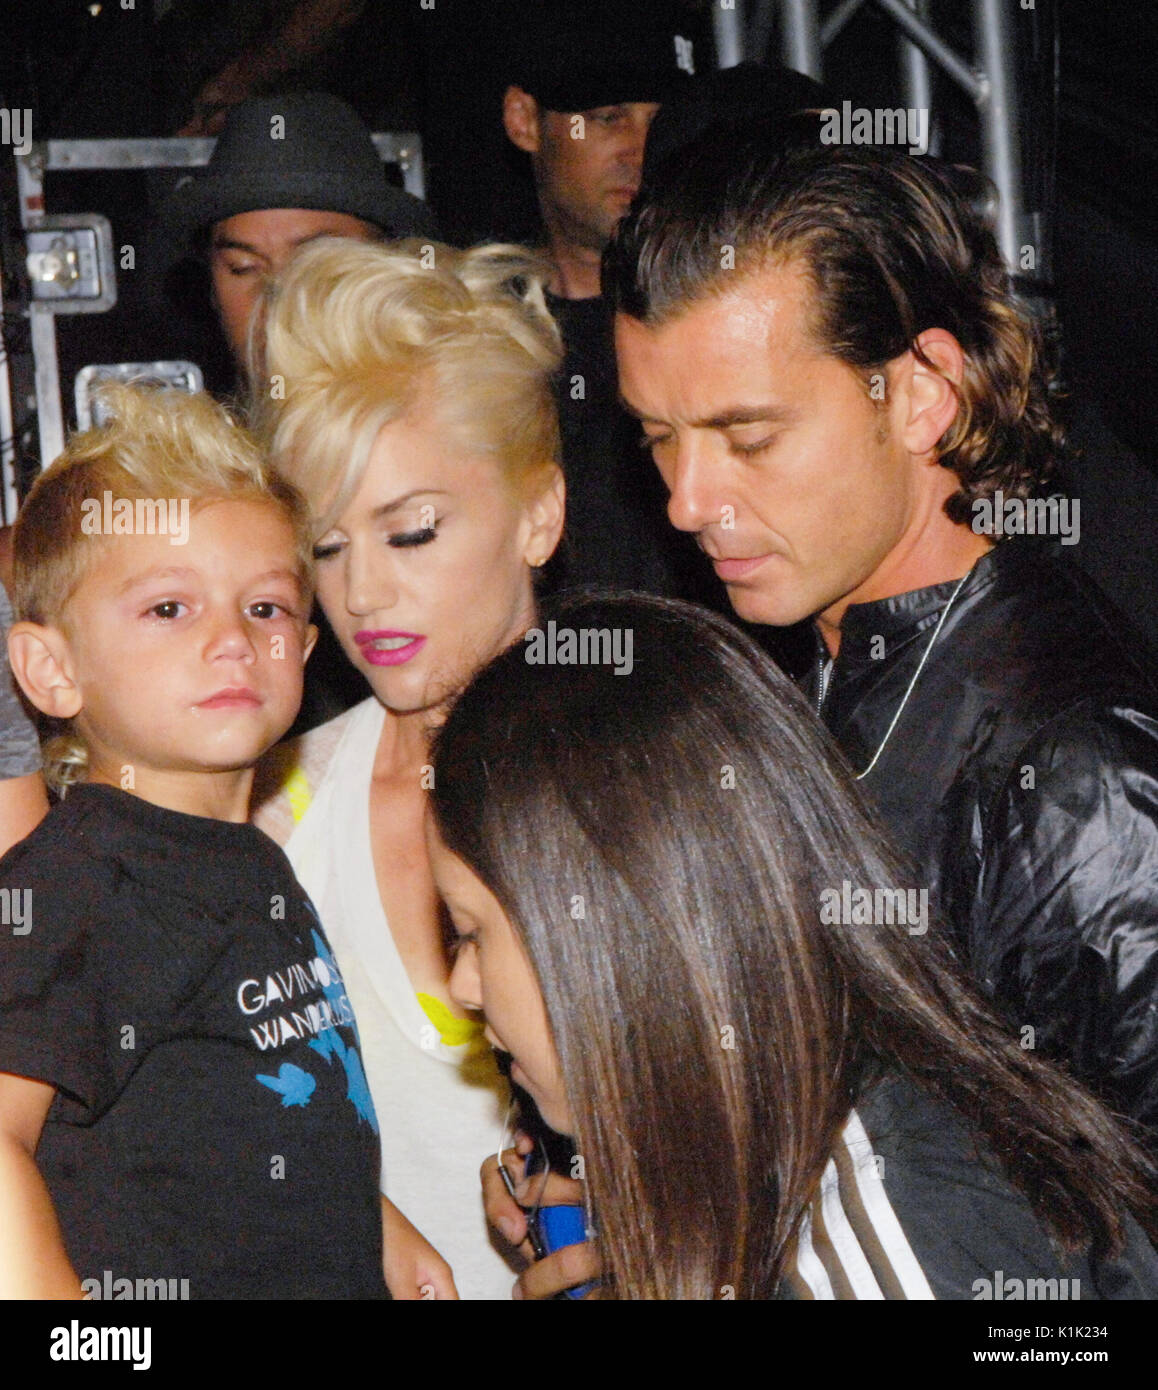 Gavin Rossdale of Bush with wife Gwen Stefani of No Doubt and their son Kingston Rossdale at the Grove in Los Angeles on August 26, 2009. Stock Photo